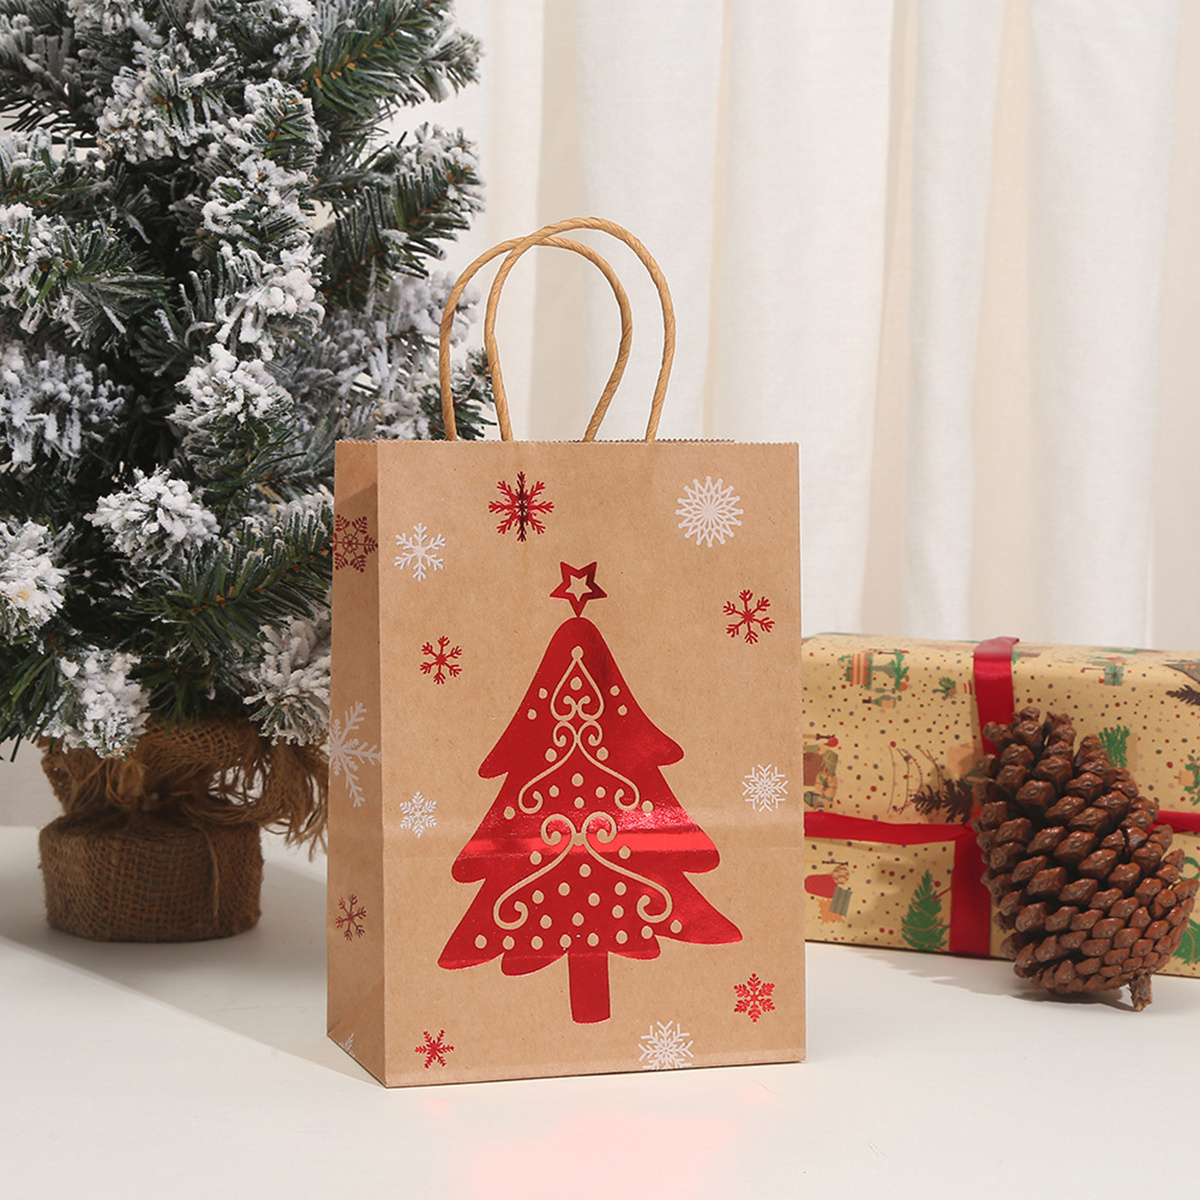 Christmas Kraft Gift Bag Set (12 Bags, 3 Sizes with 50 Sheets Tissue Paper Included) Black, White, Brown, Christmas Pine Trees, Snowflakes